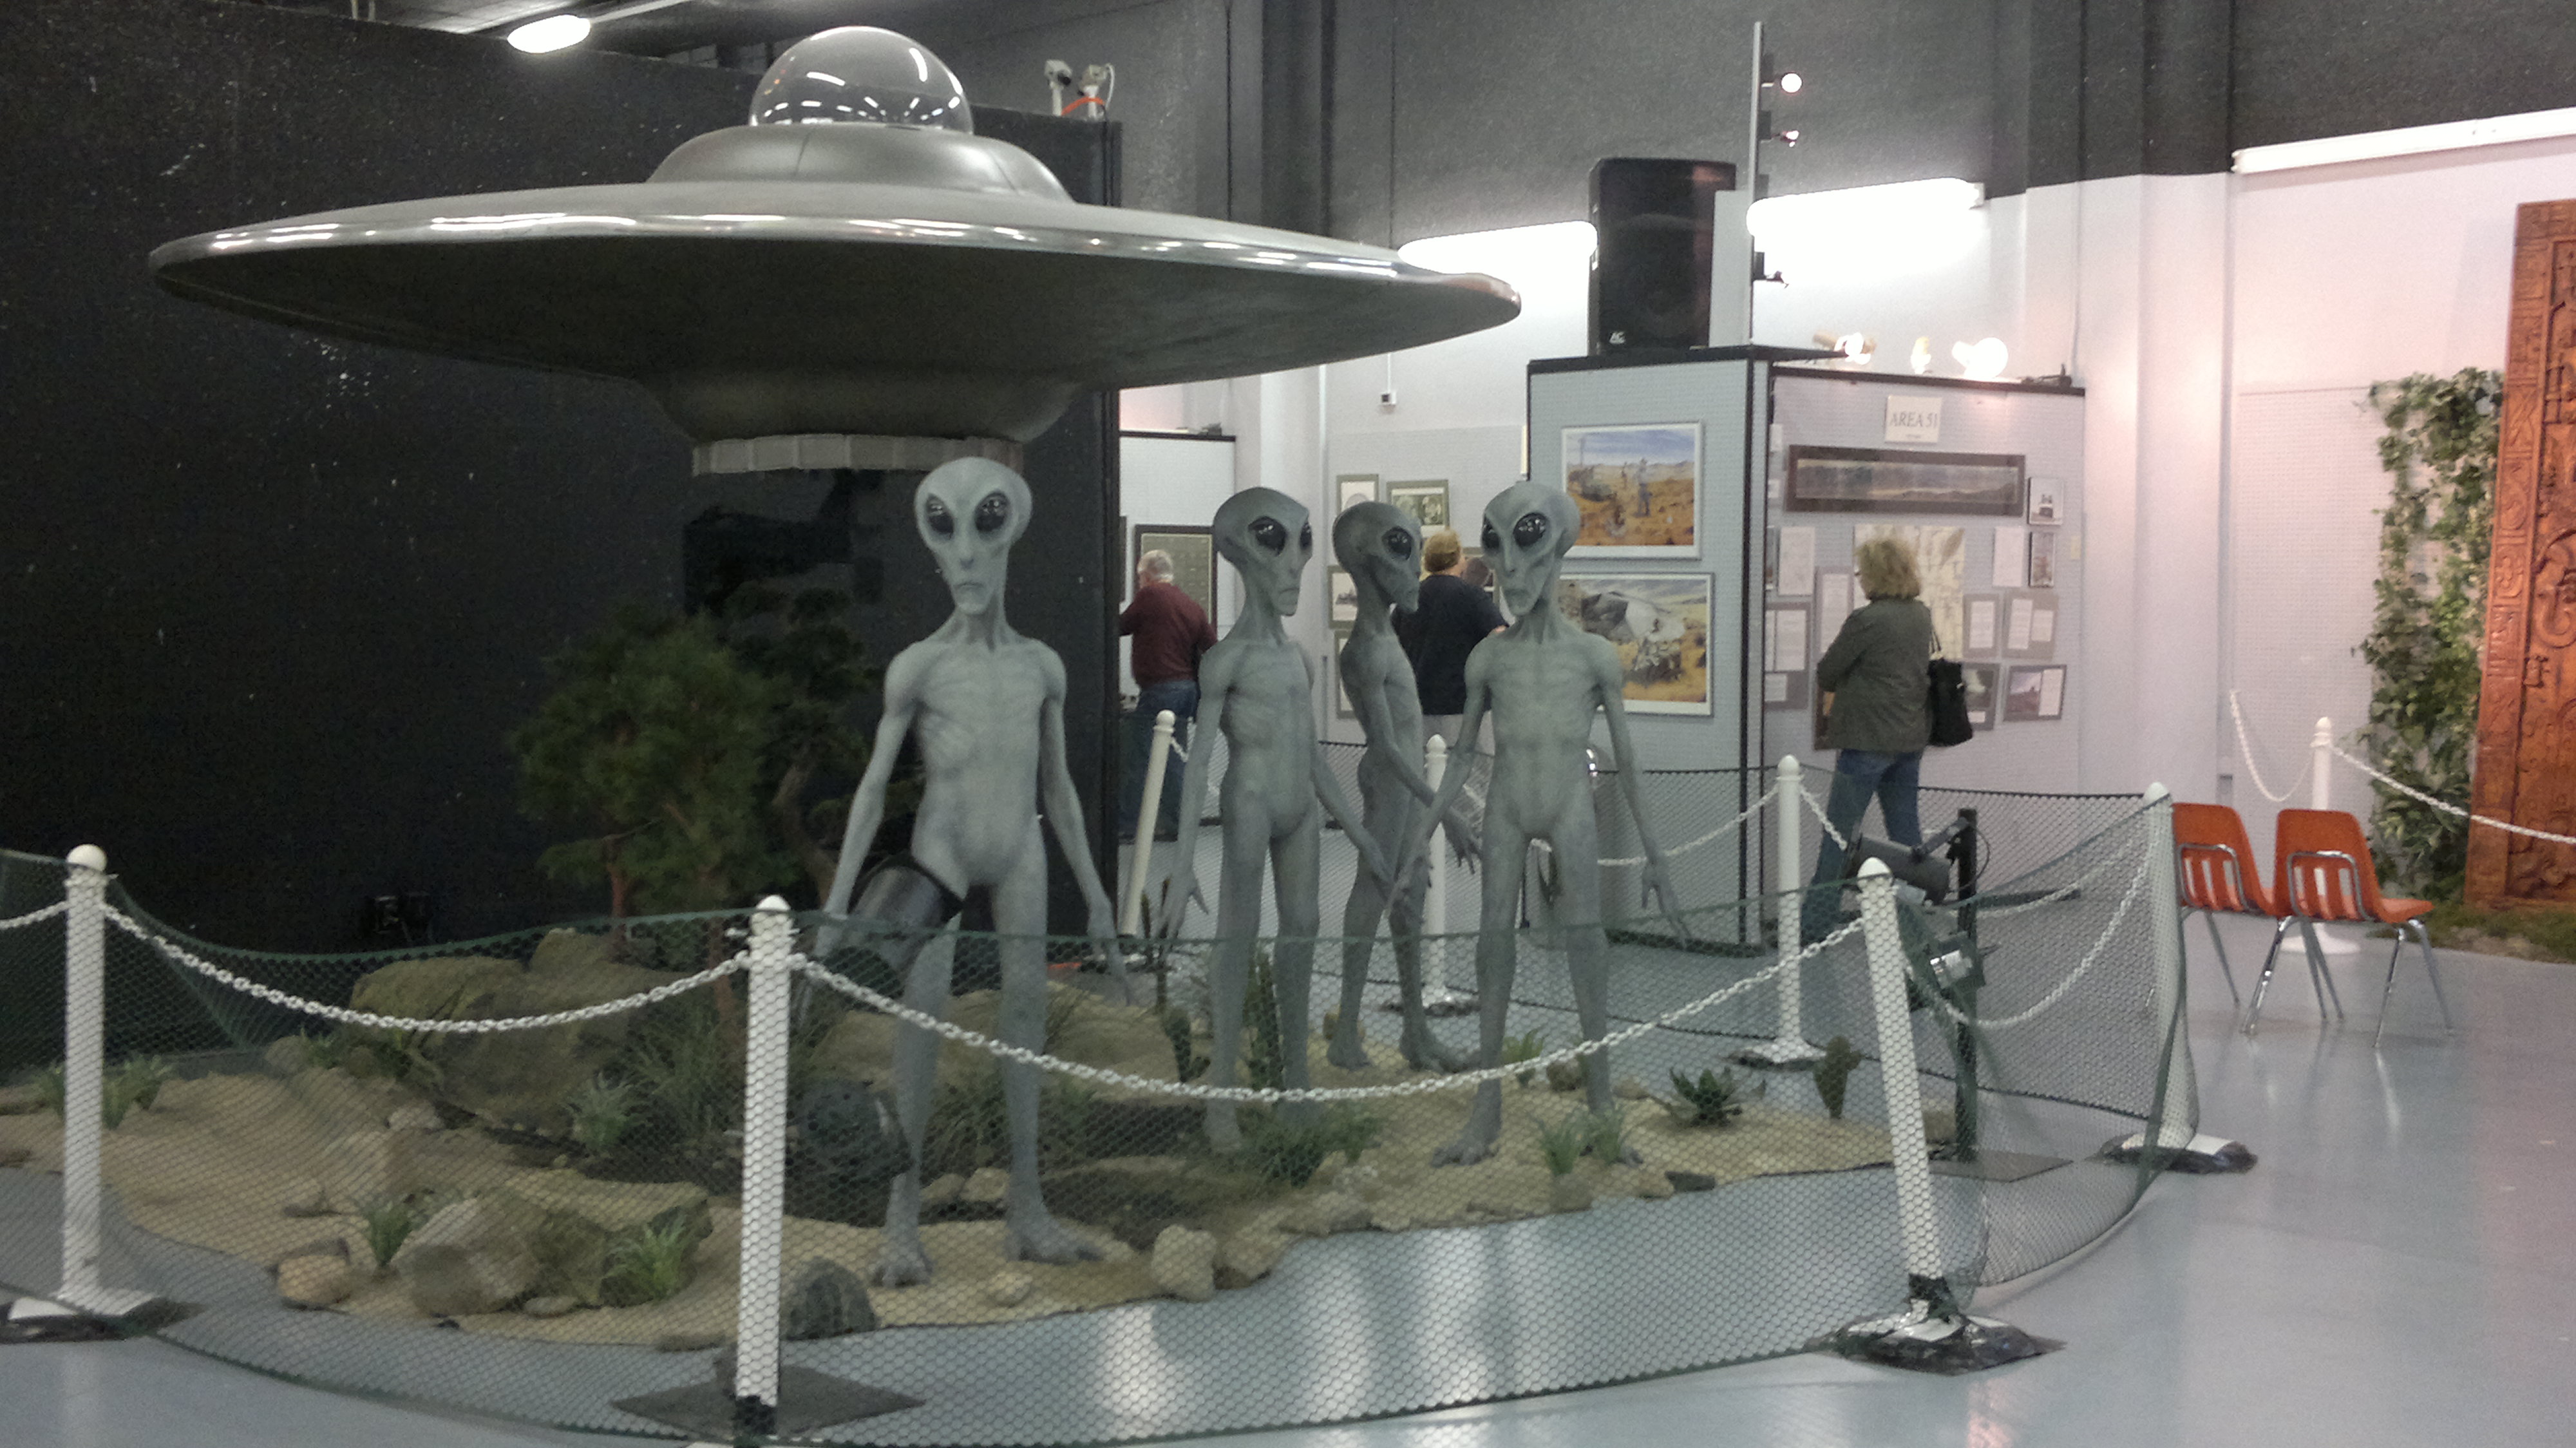 Images Wikimedia Commons/Kimble Young Gray_Aliens_with_Saucer_UFO_Museum,_Roswell.jpg